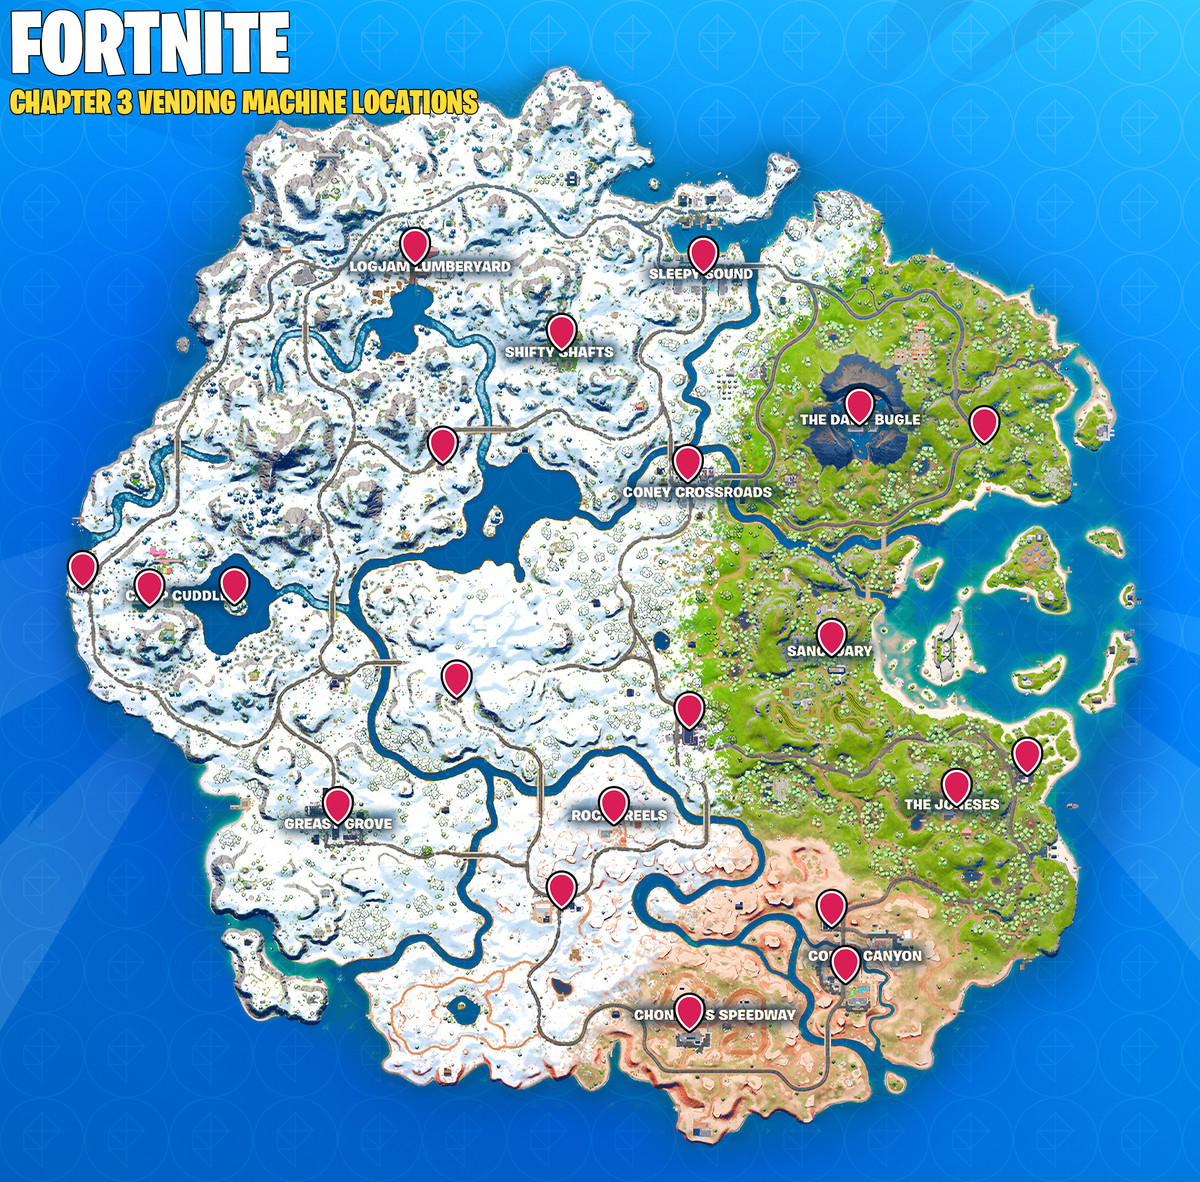 A Fortnite map showing Malfunctioning Vending Machine locations